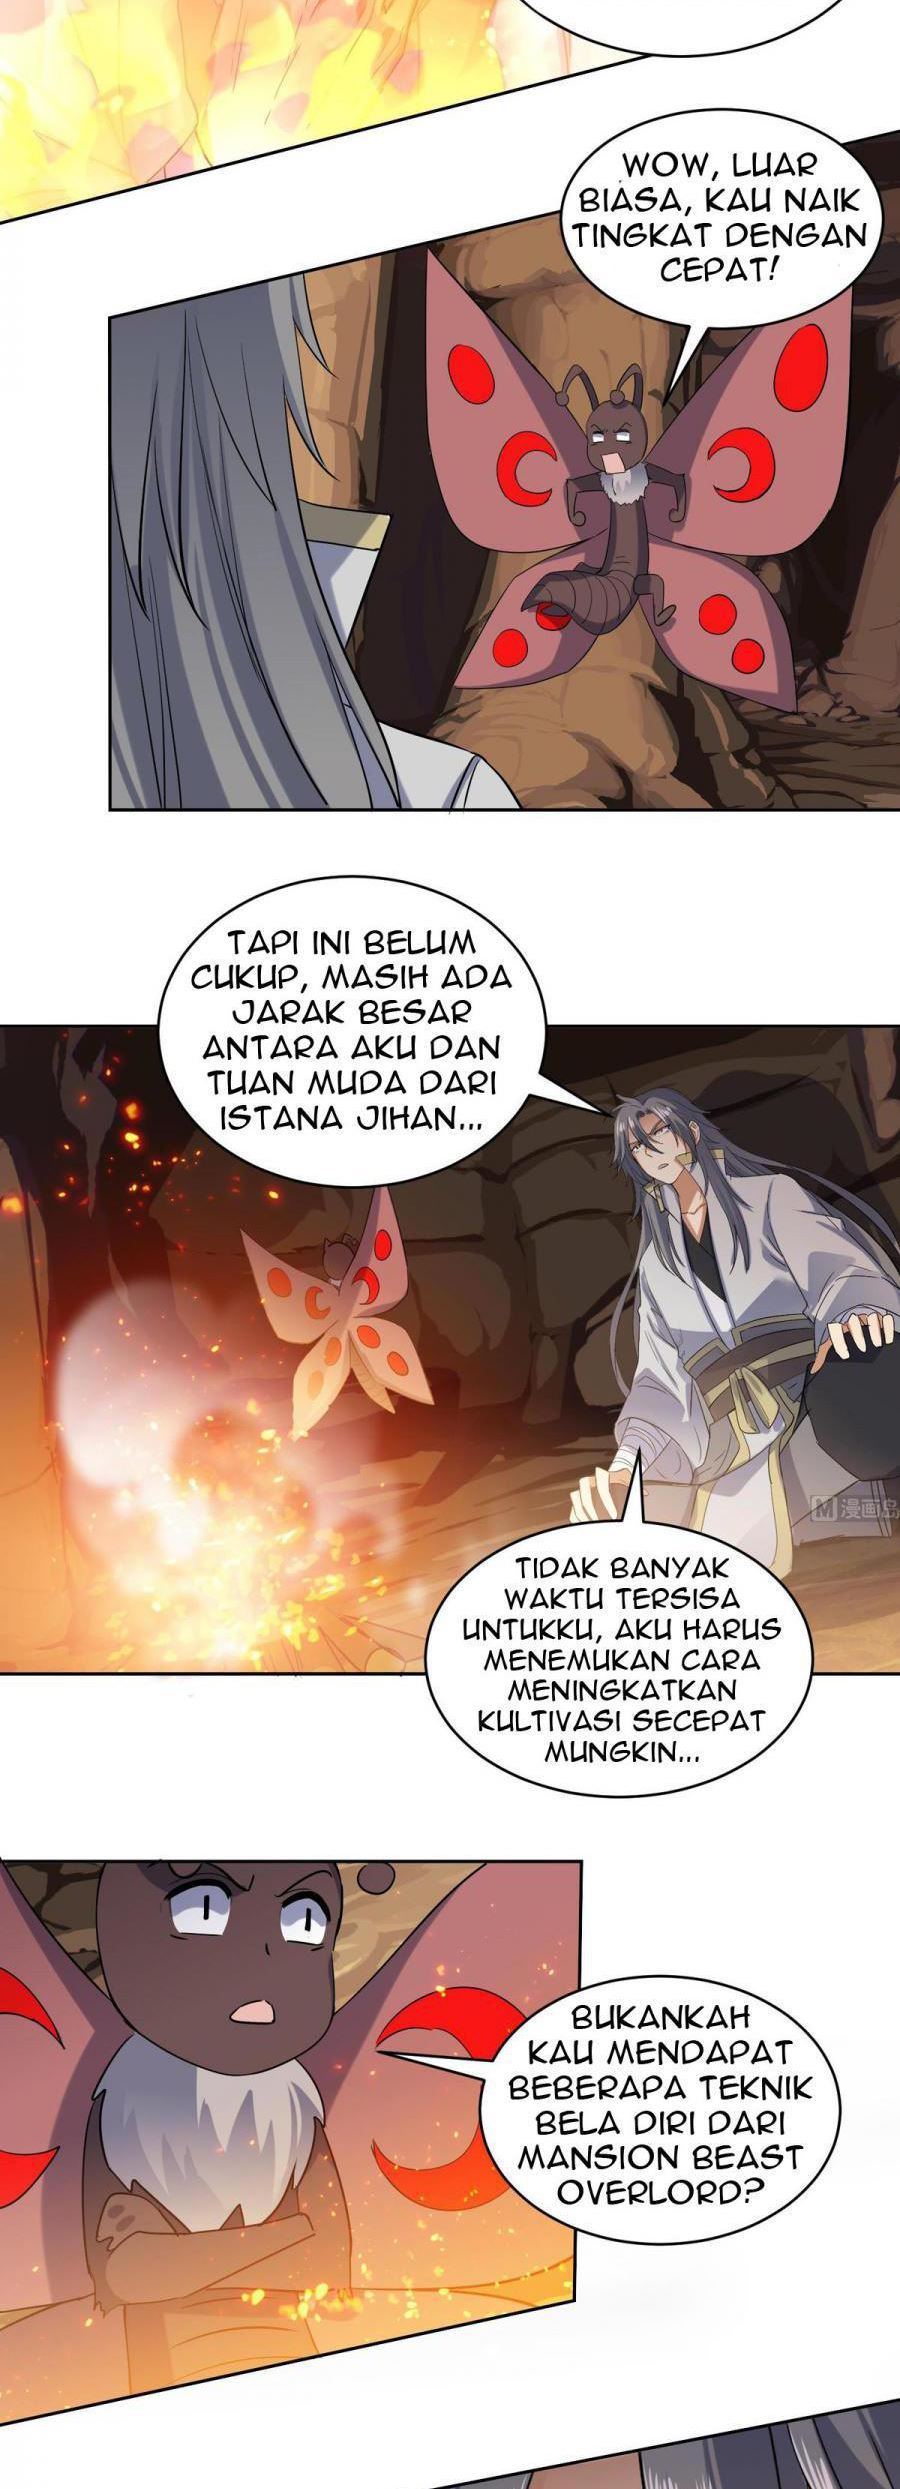 The Nine Heaven of Martial Arts Chapter 221